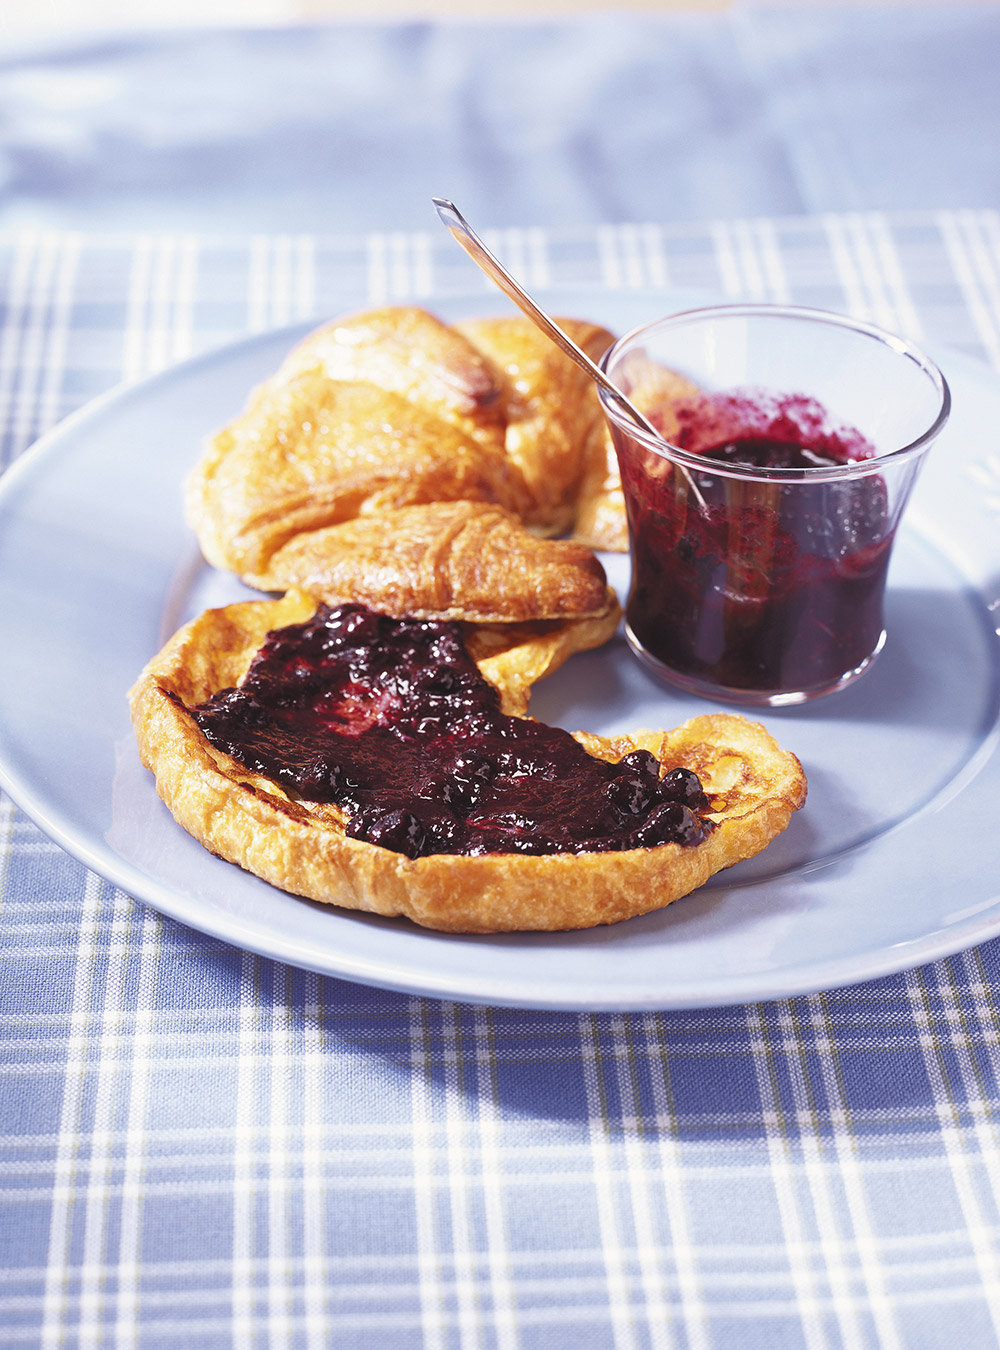 Croissants French Toast with Blueberry Sauce